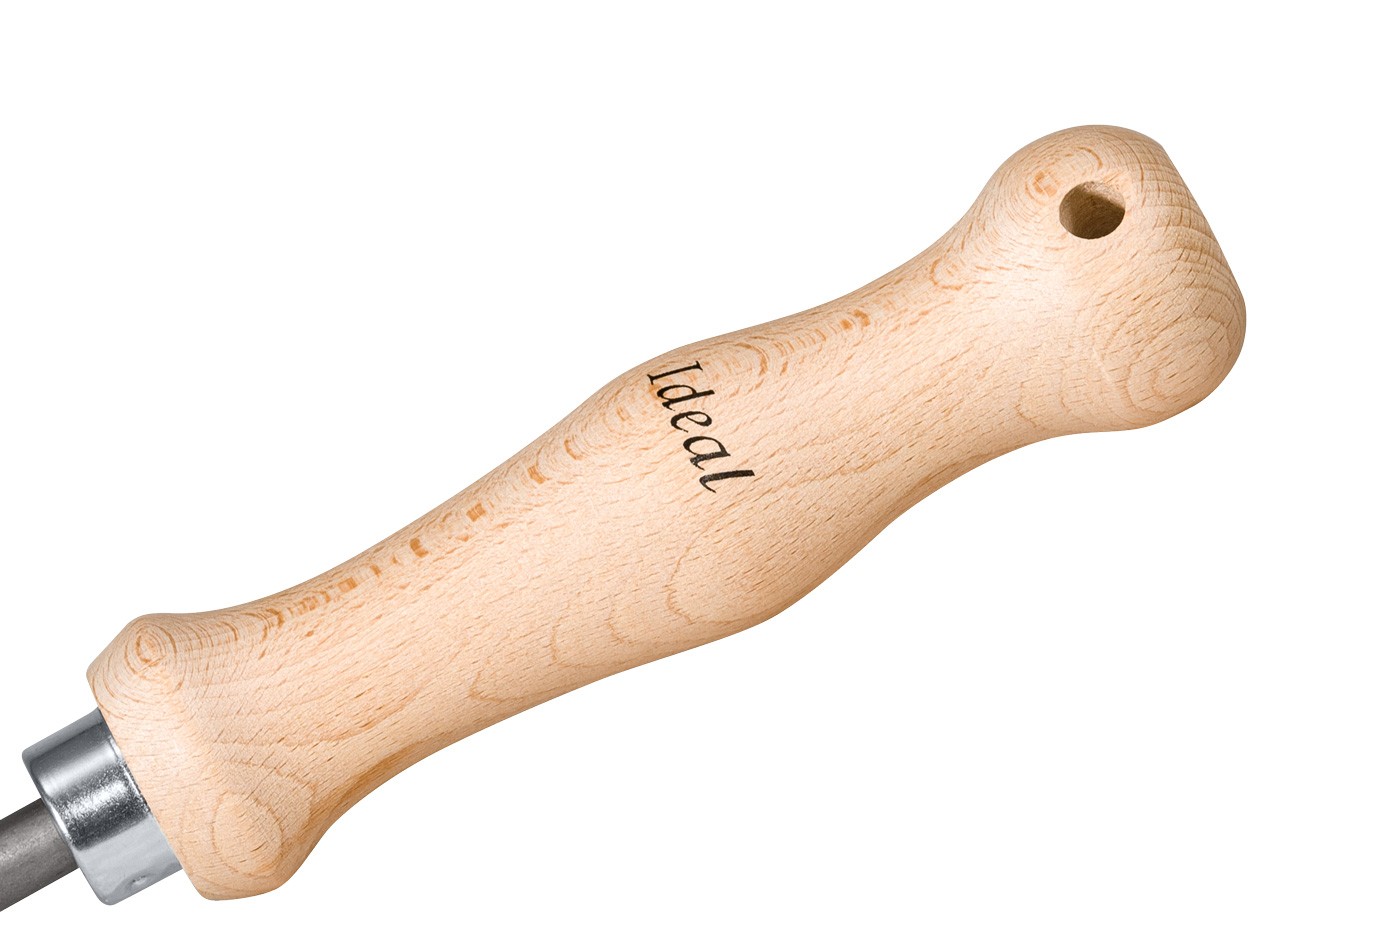 Beech wood handle with hole for hanging